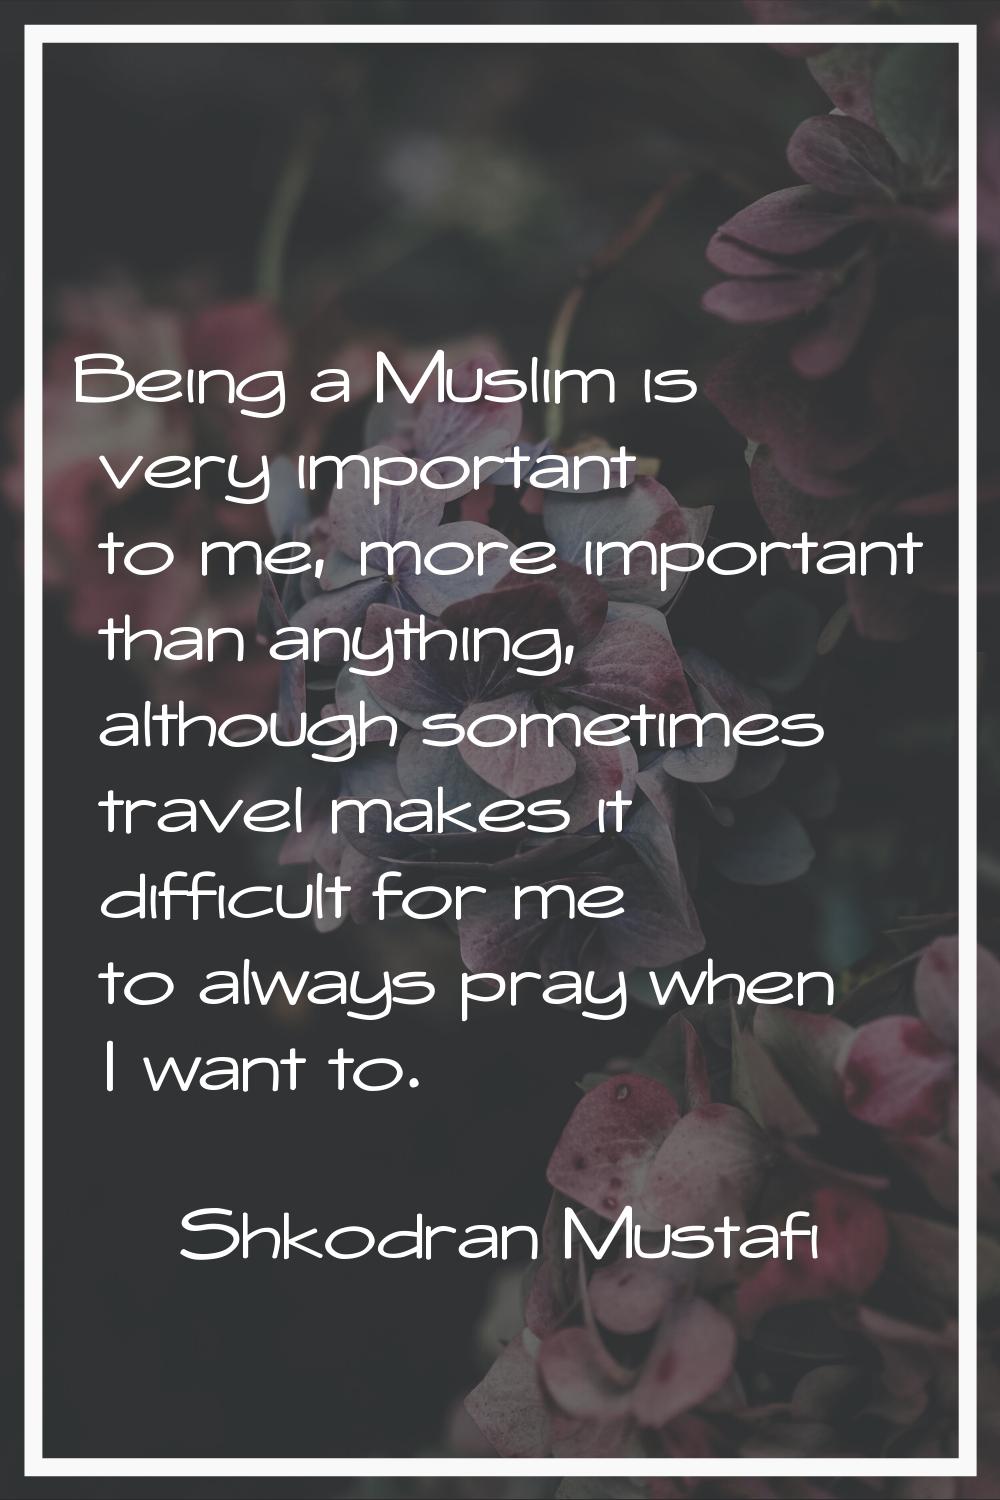 Being a Muslim is very important to me, more important than anything, although sometimes travel mak